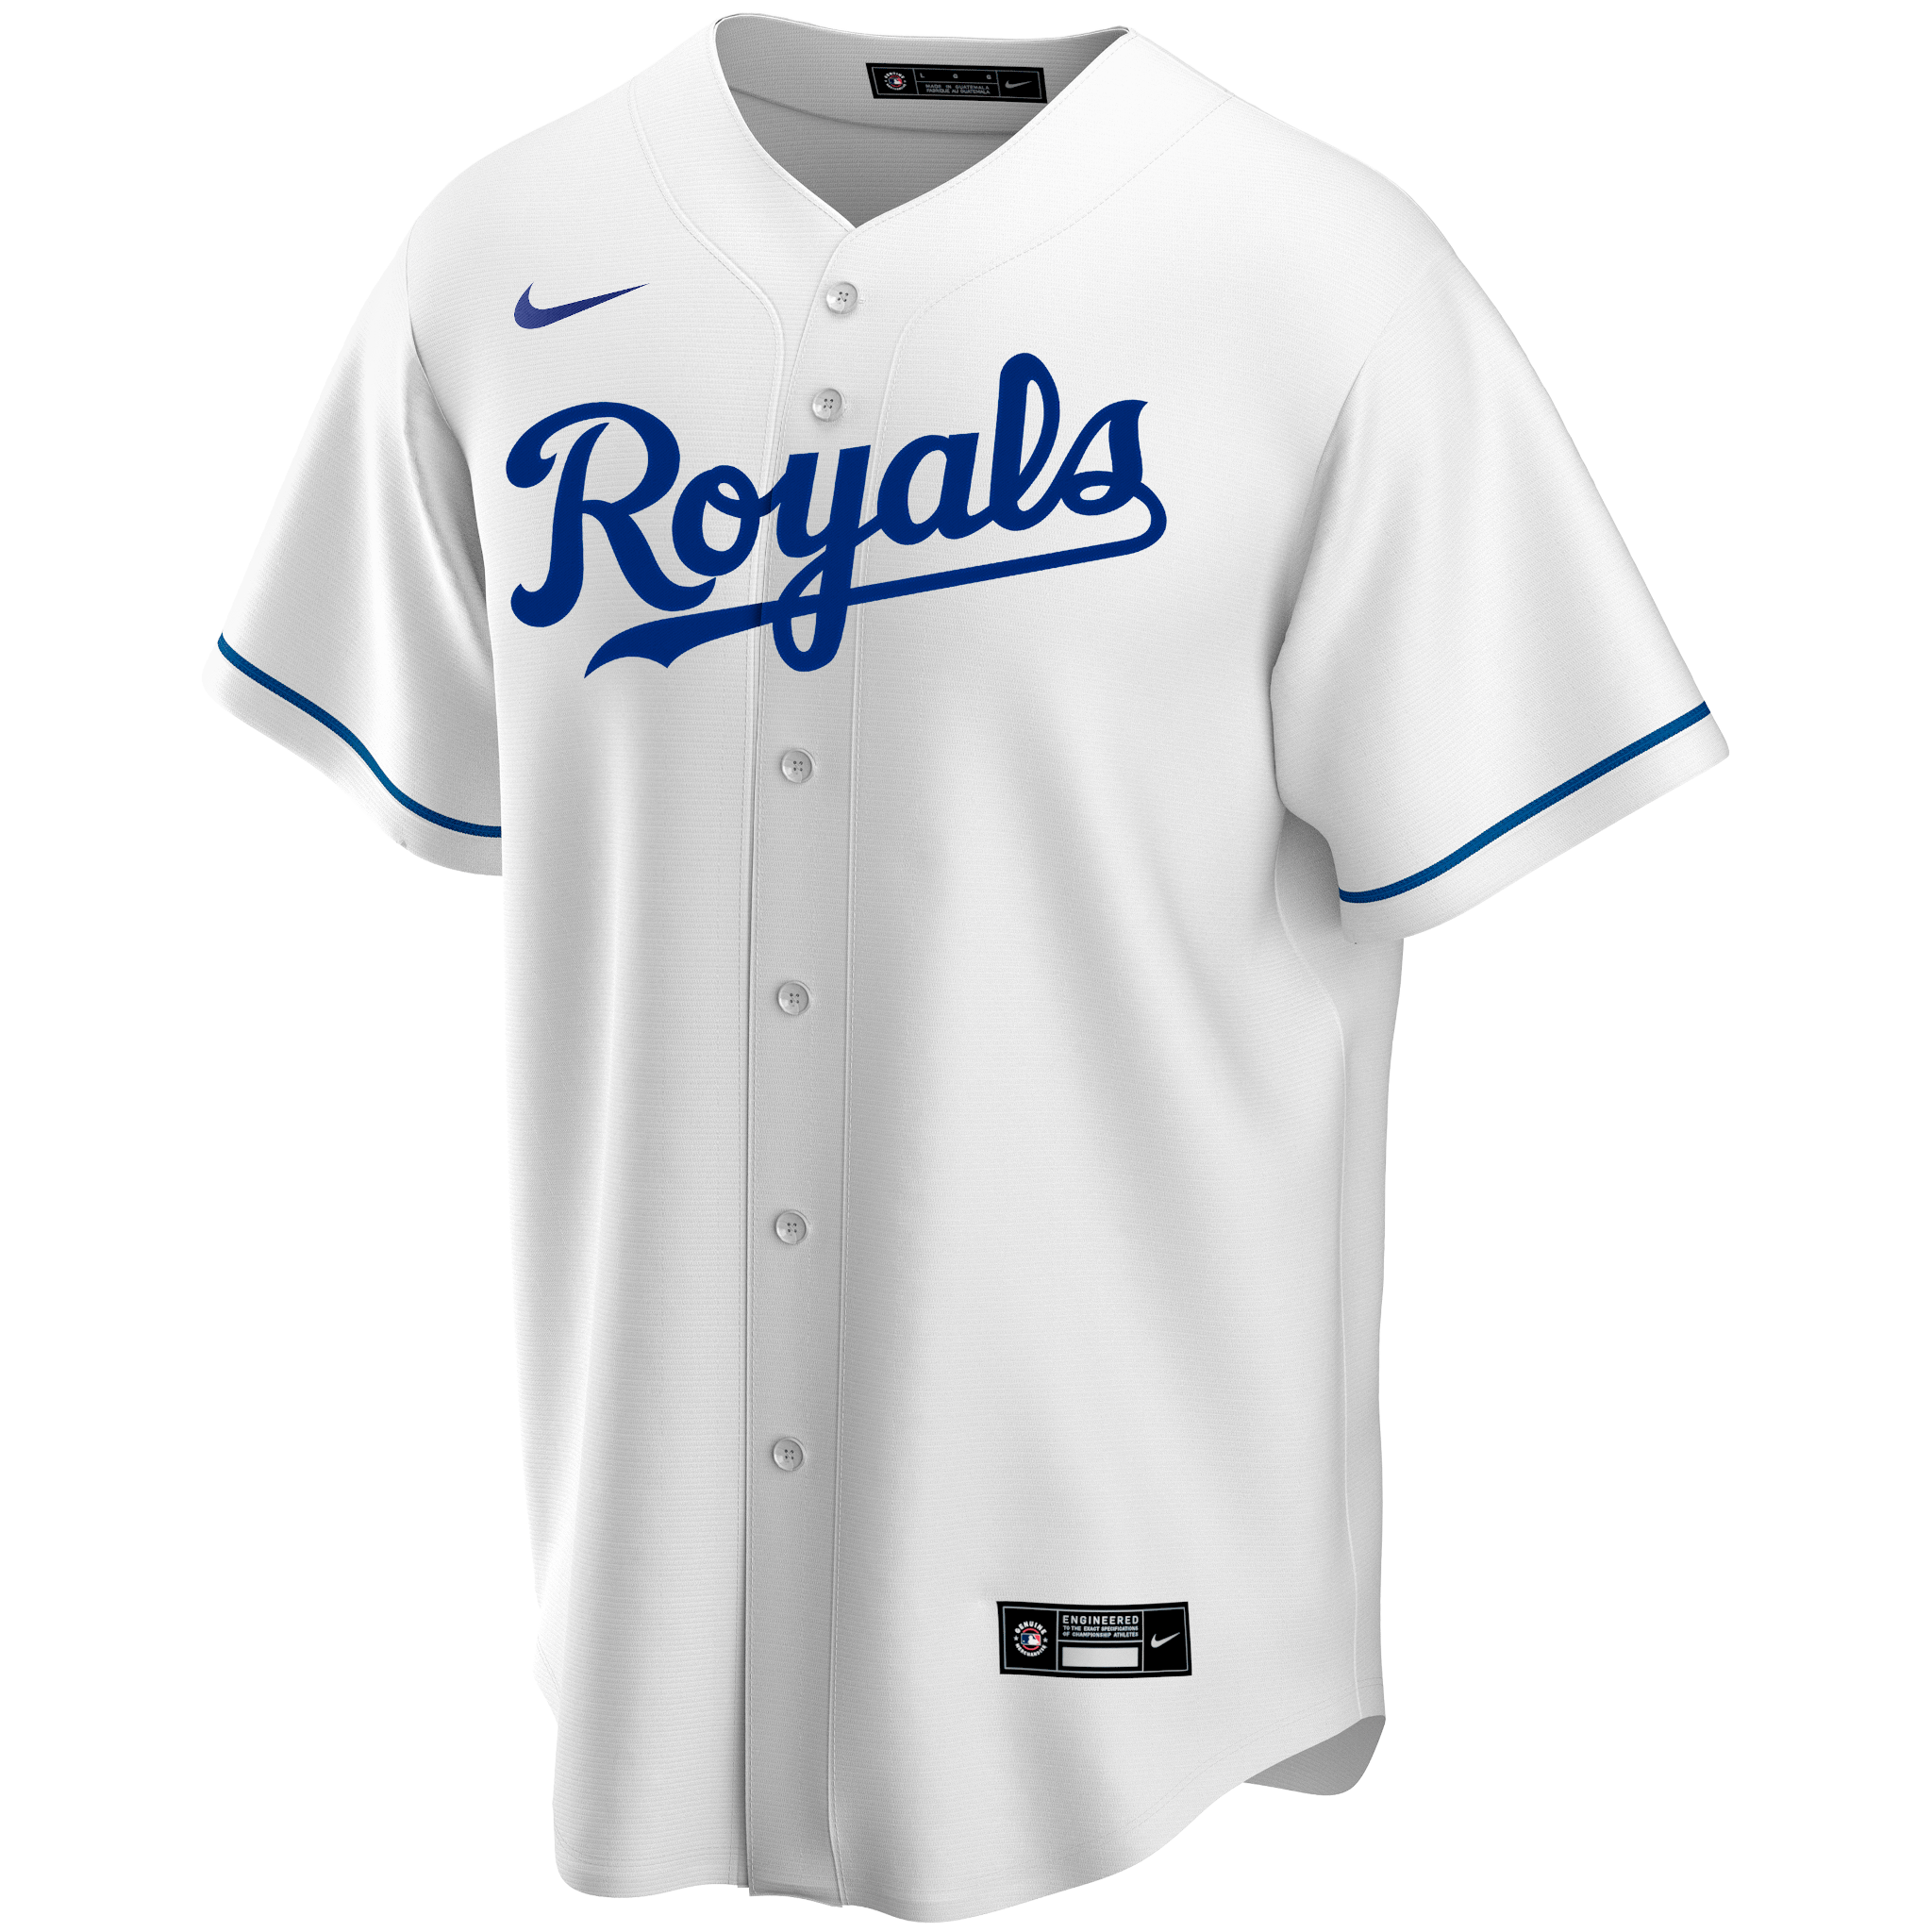 Nike Kansas City Royals Personalized Youth Home Jersey